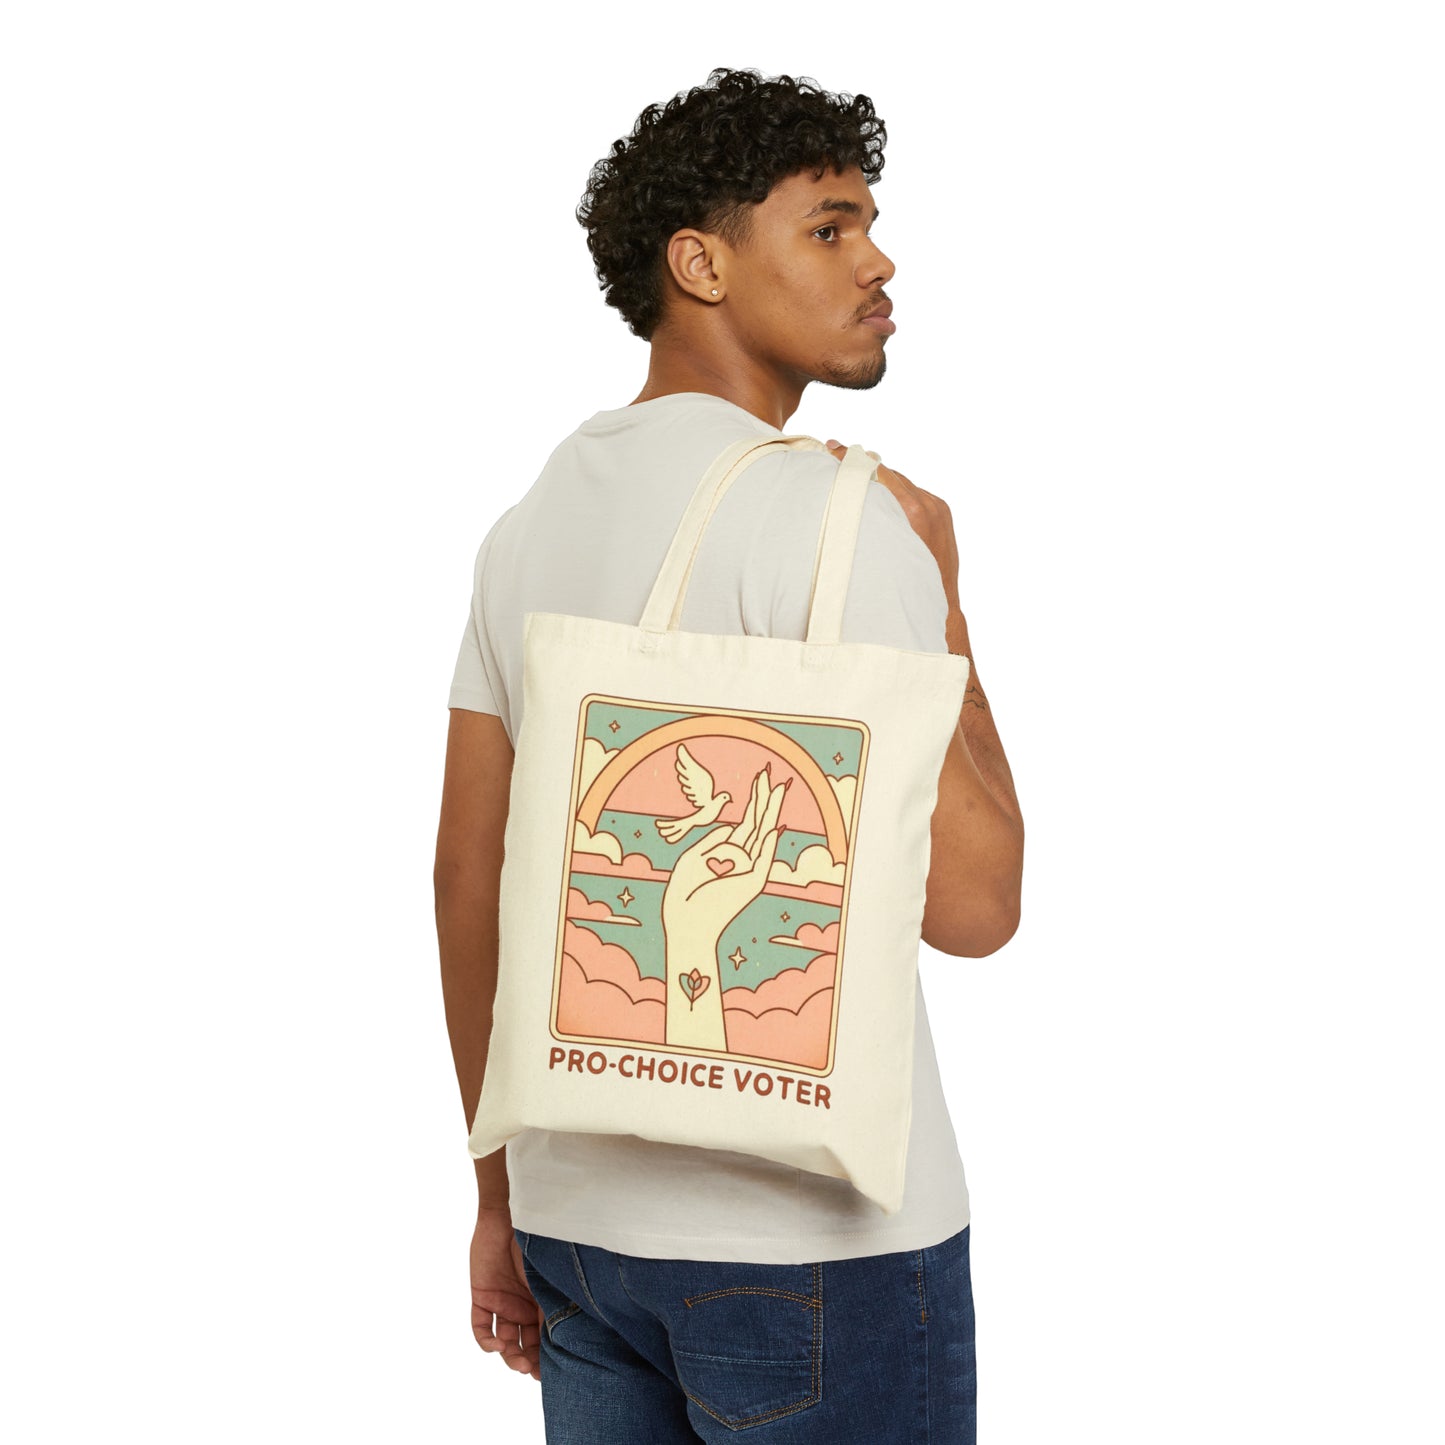 Pro-Choice Voter (Canvas Tote Bag)